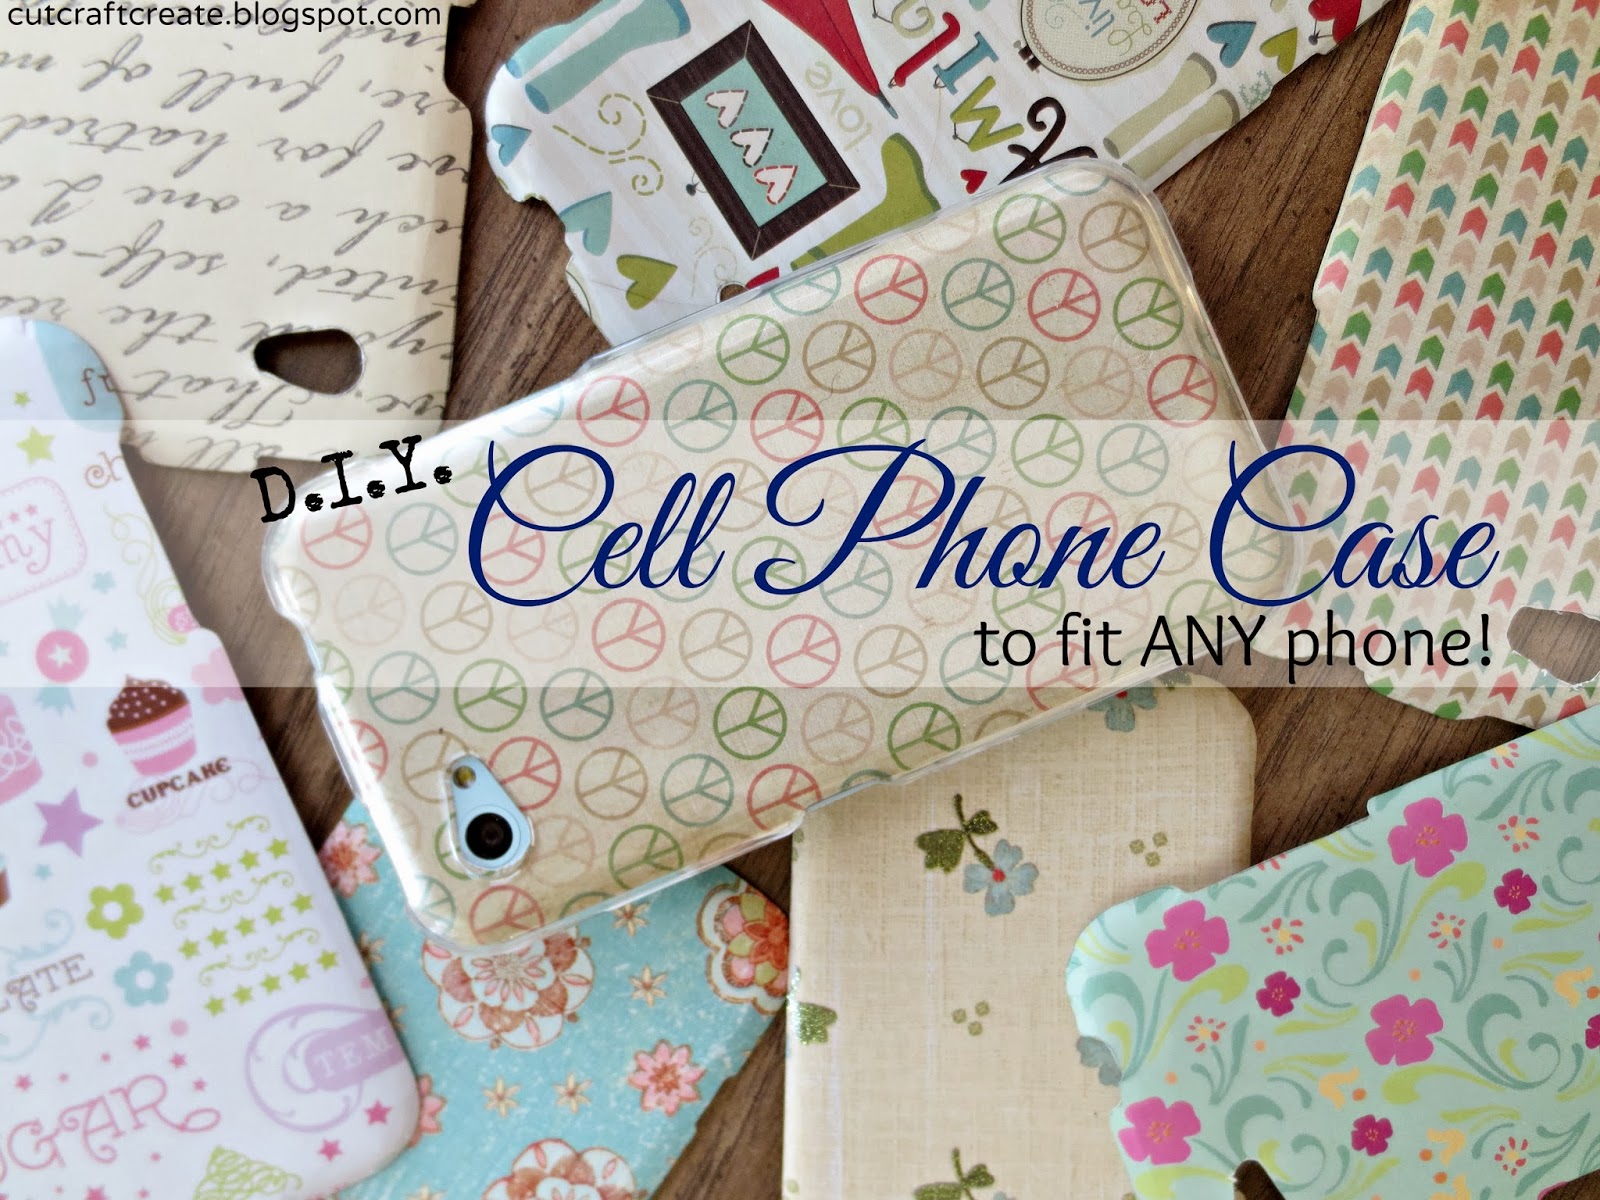 Cut, Craft, Create DIY Cell Phone Case Tutorial to fit any phone! pic photo